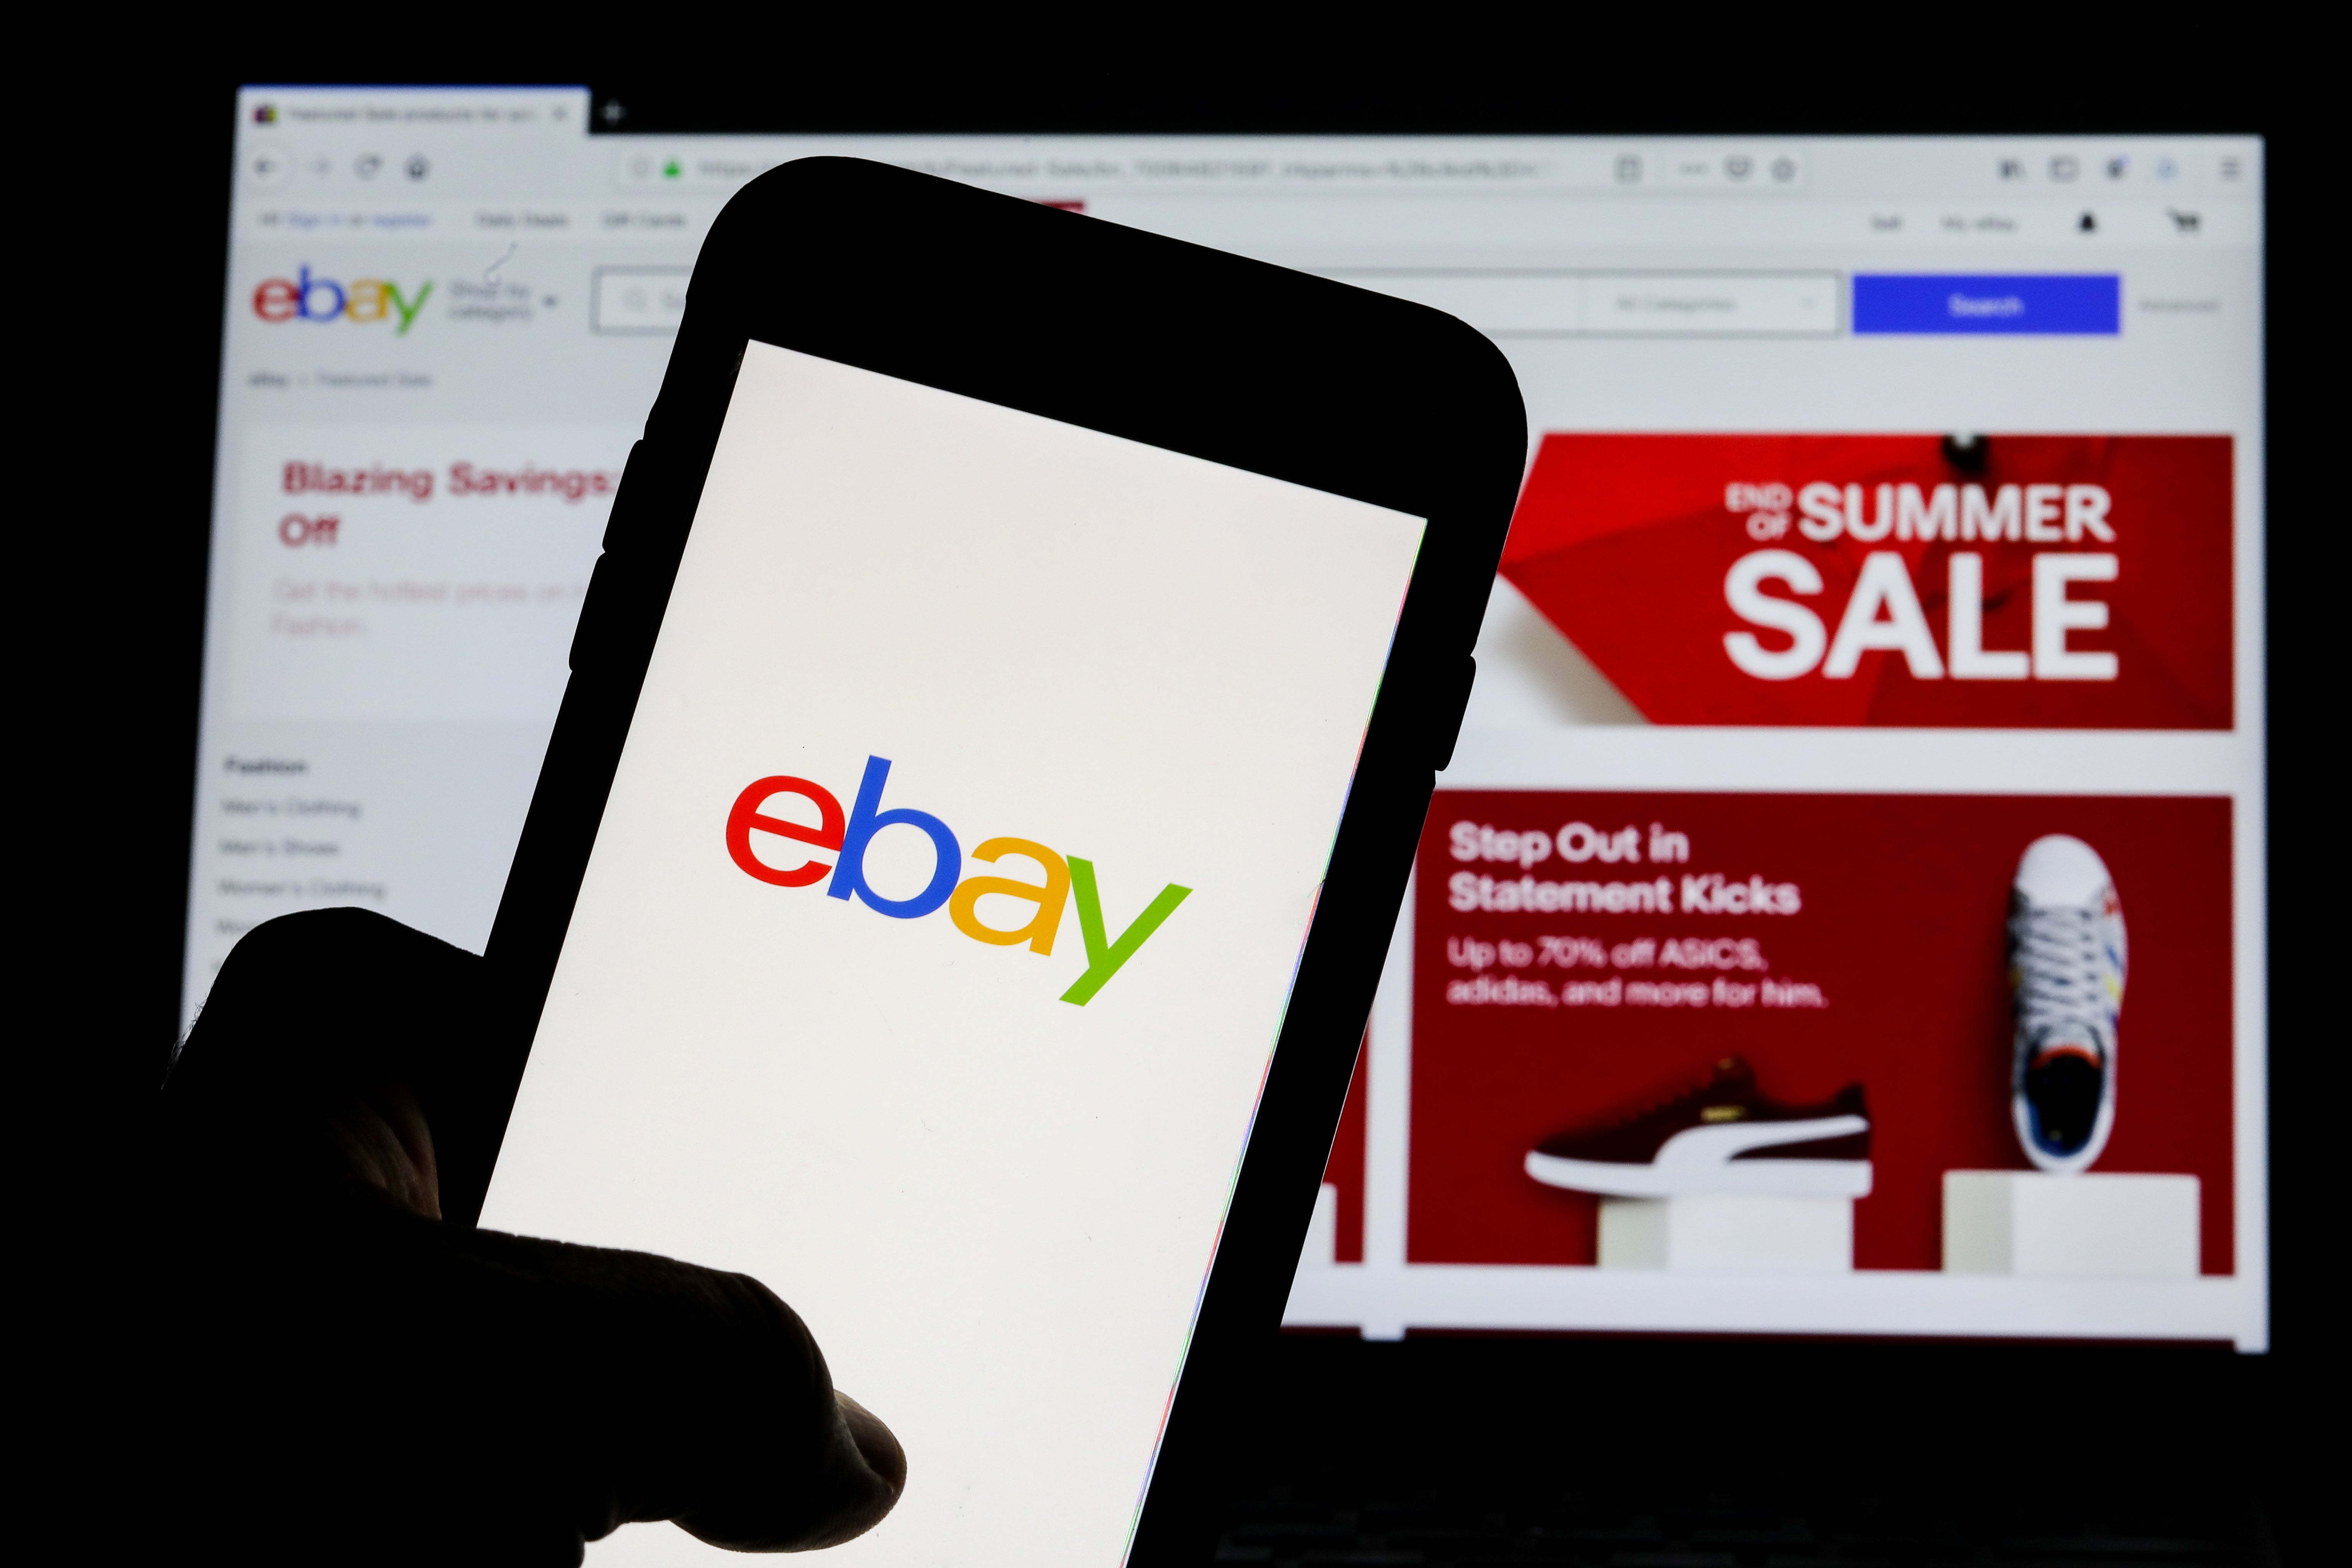 Advenita set to merge with eBay’s classified ads business which includes Gumtree